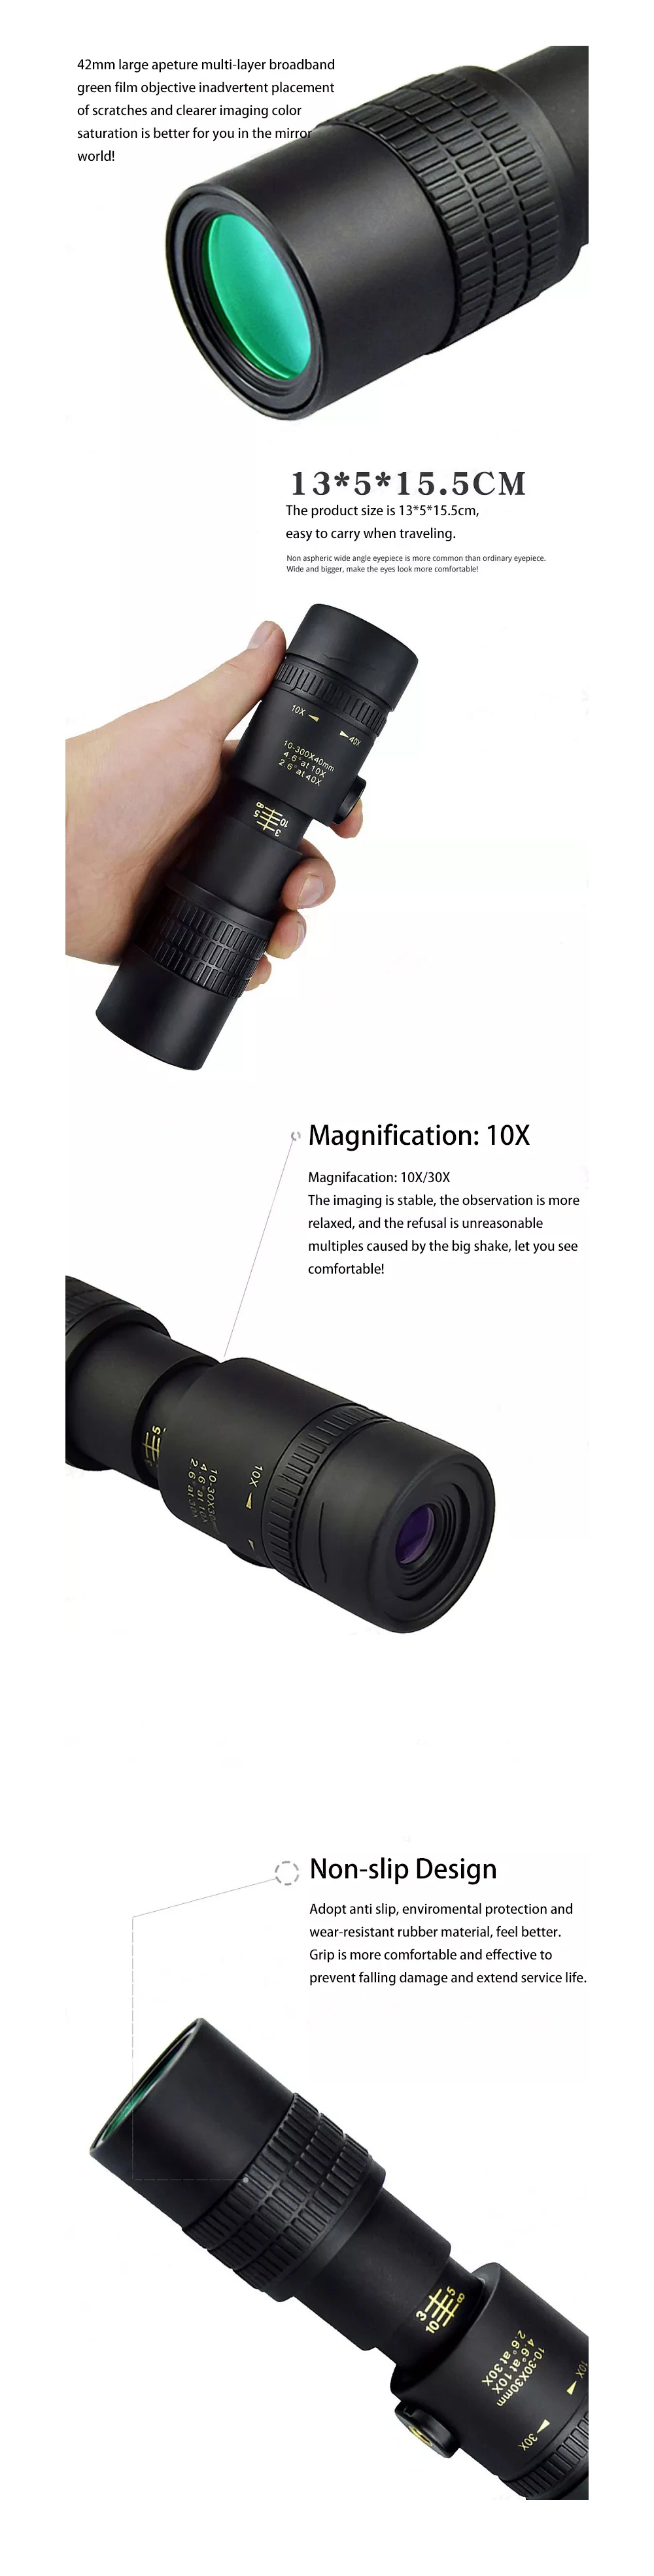 Tripod Available Telephoto Telescope Waterproof Bak4 Prism Zoom Monocular for Mobile Phone